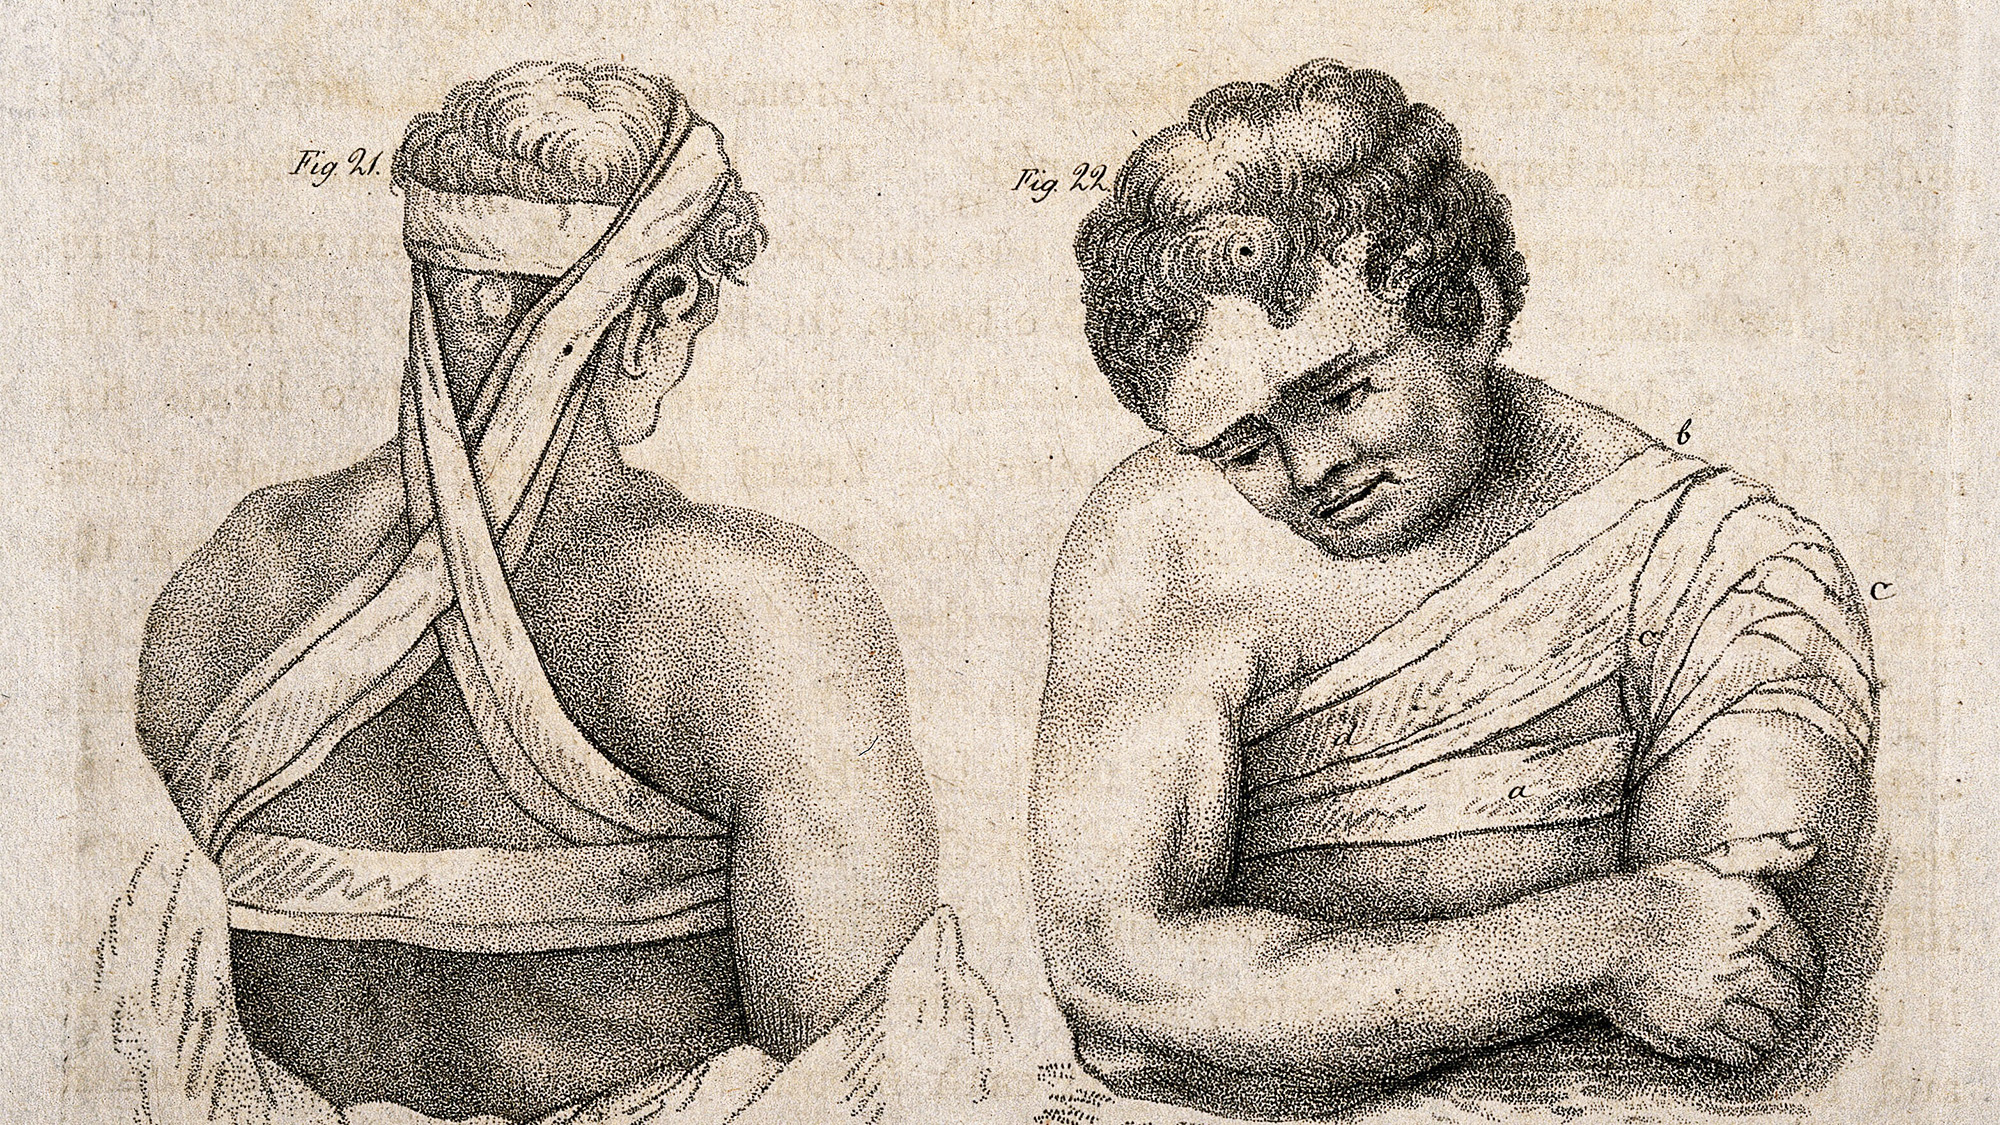 An engraving showing a bandaged figure